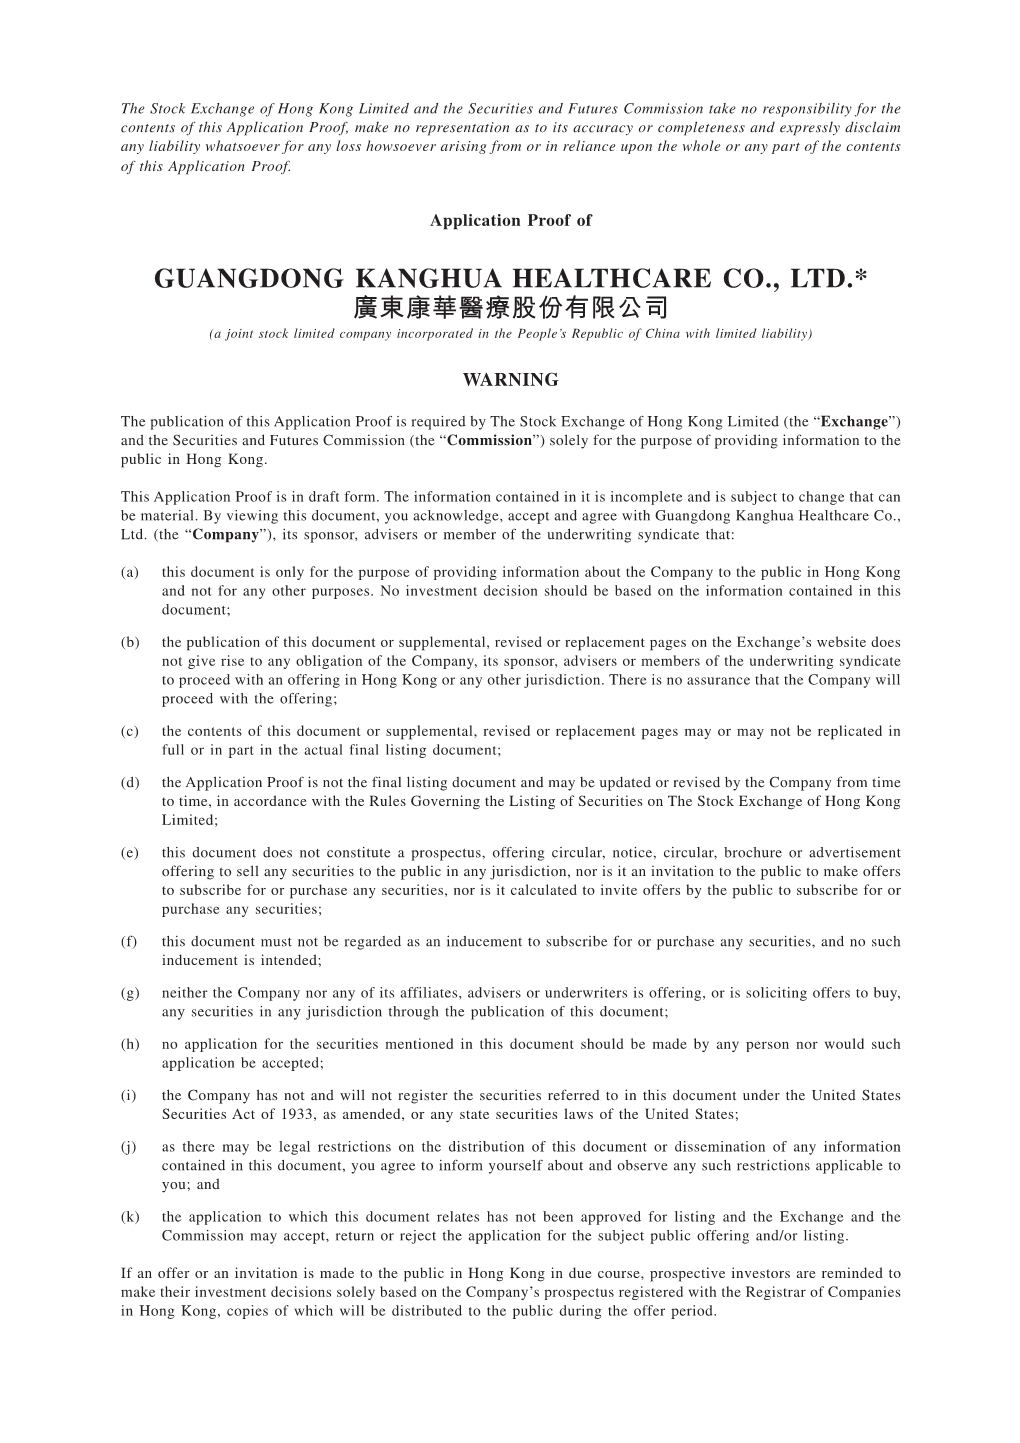 GUANGDONG KANGHUA HEALTHCARE CO., LTD.* 廣東康華醫療股份有限公司 (A Joint Stock Limited Company Incorporated in the People’S Republic of China with Limited Liability)